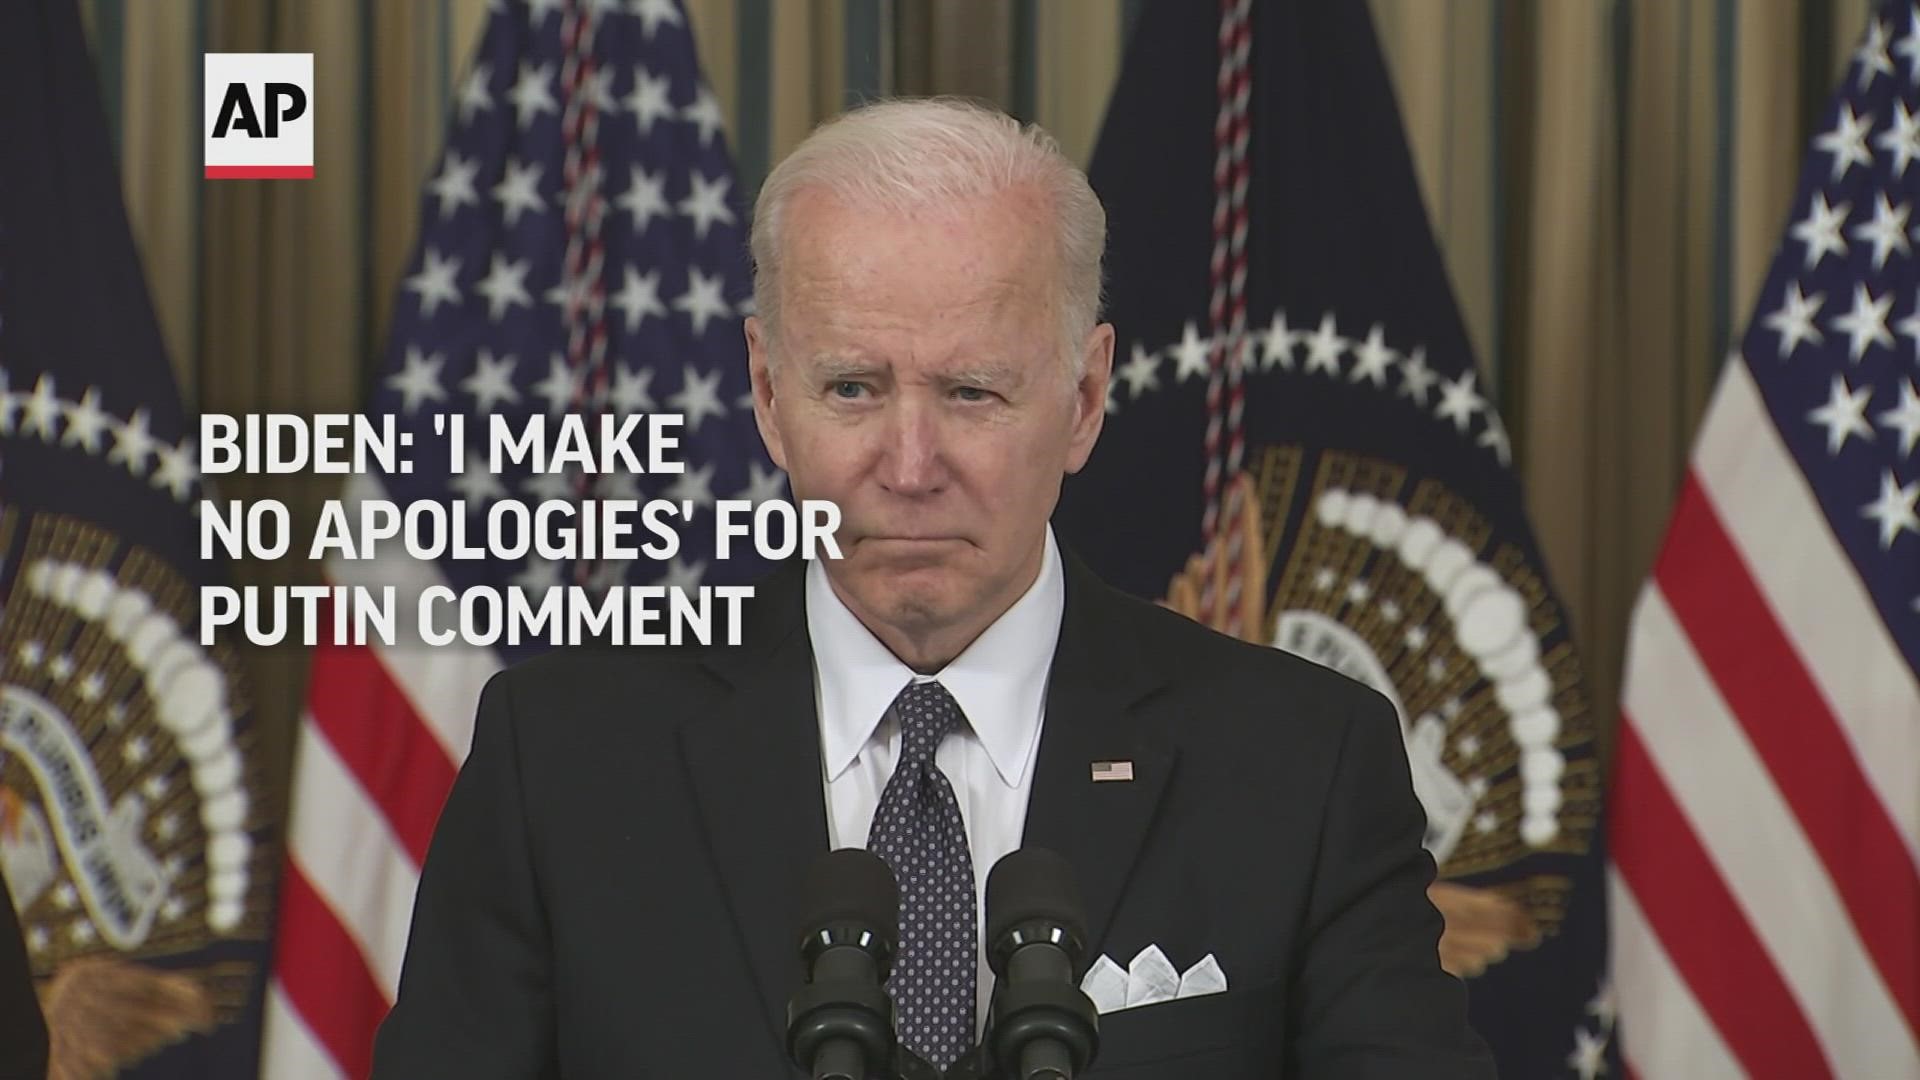 Biden said that he would make “no apologies” and wasn't “walking anything back” after his weekend comment that Putin “cannot remain in power" drew controversy.